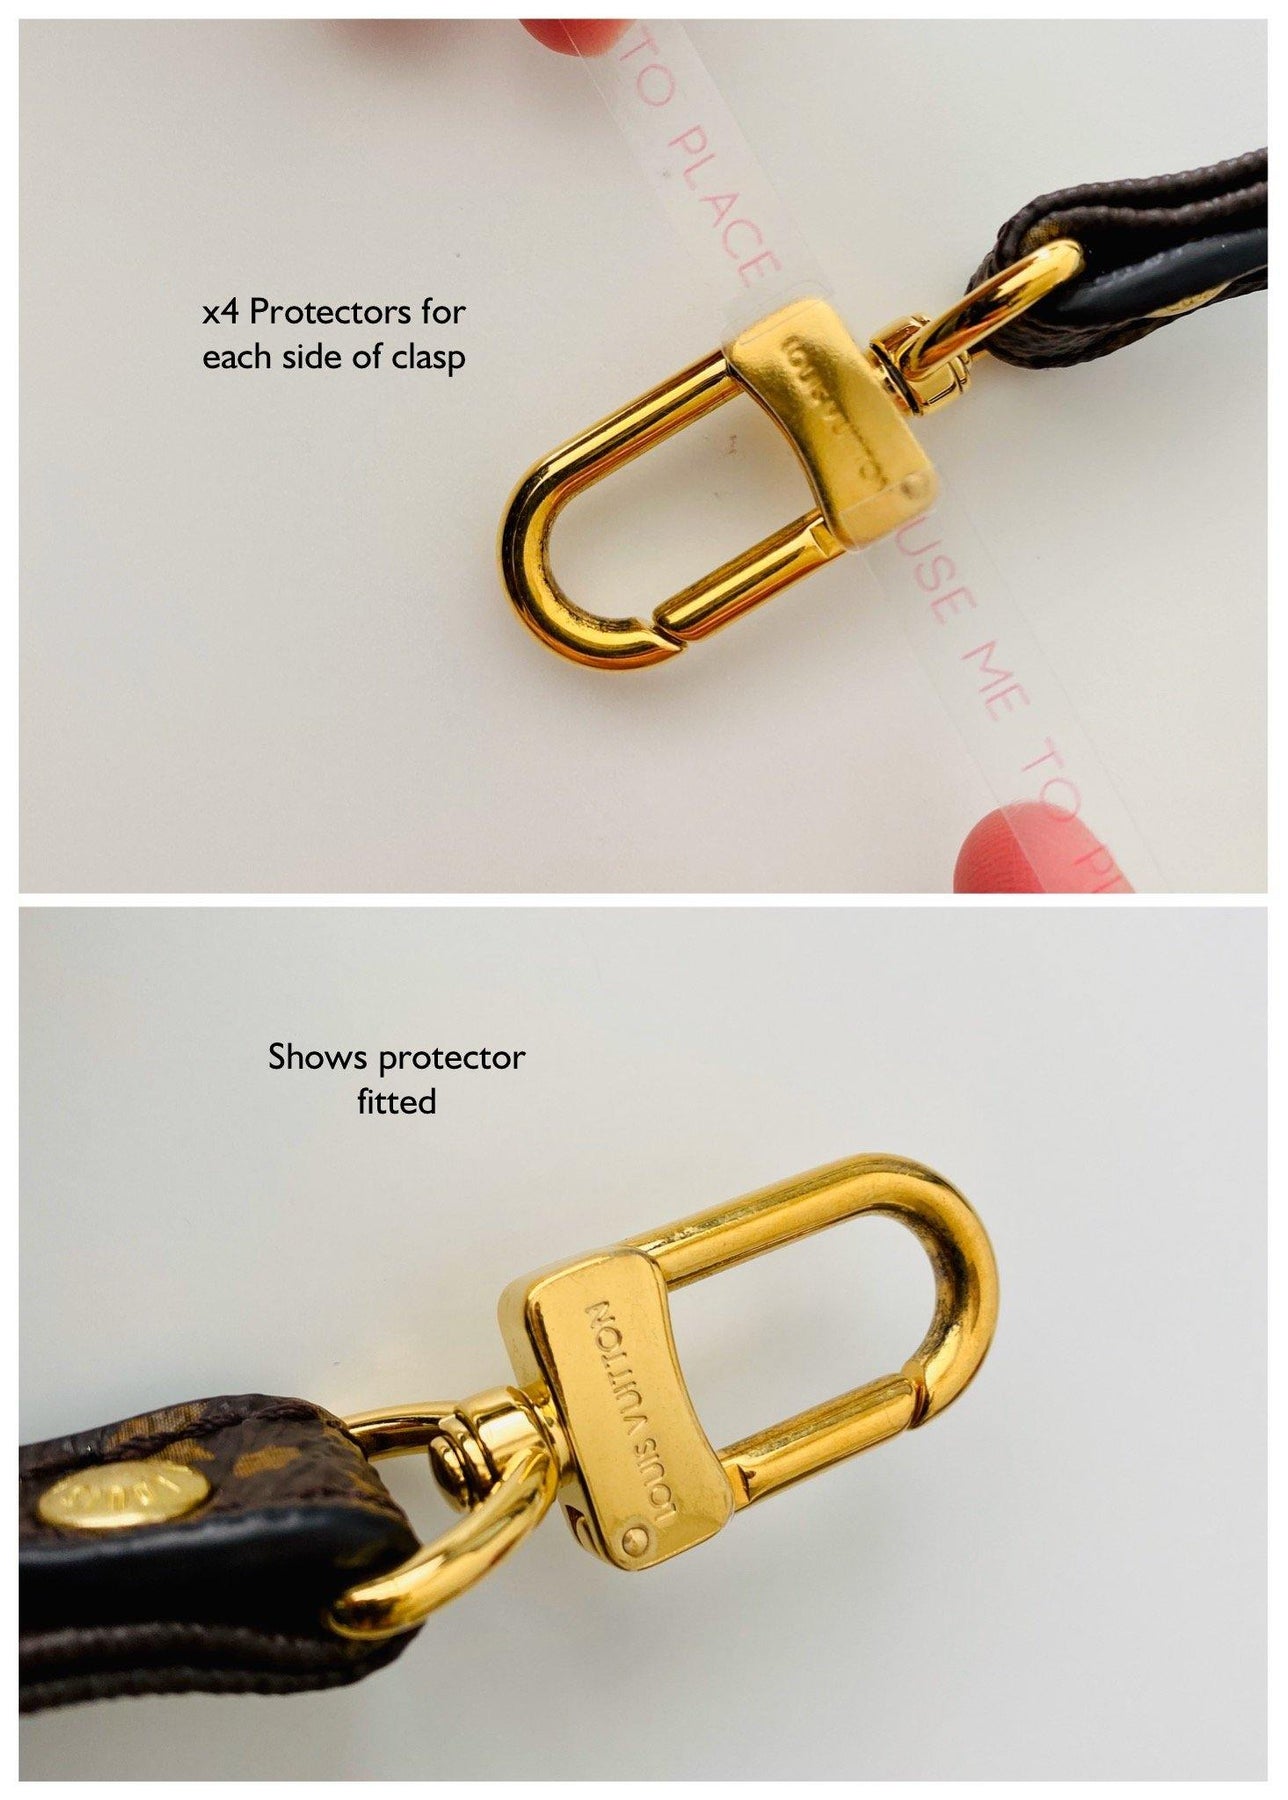 Protectors compatible with H Padlock